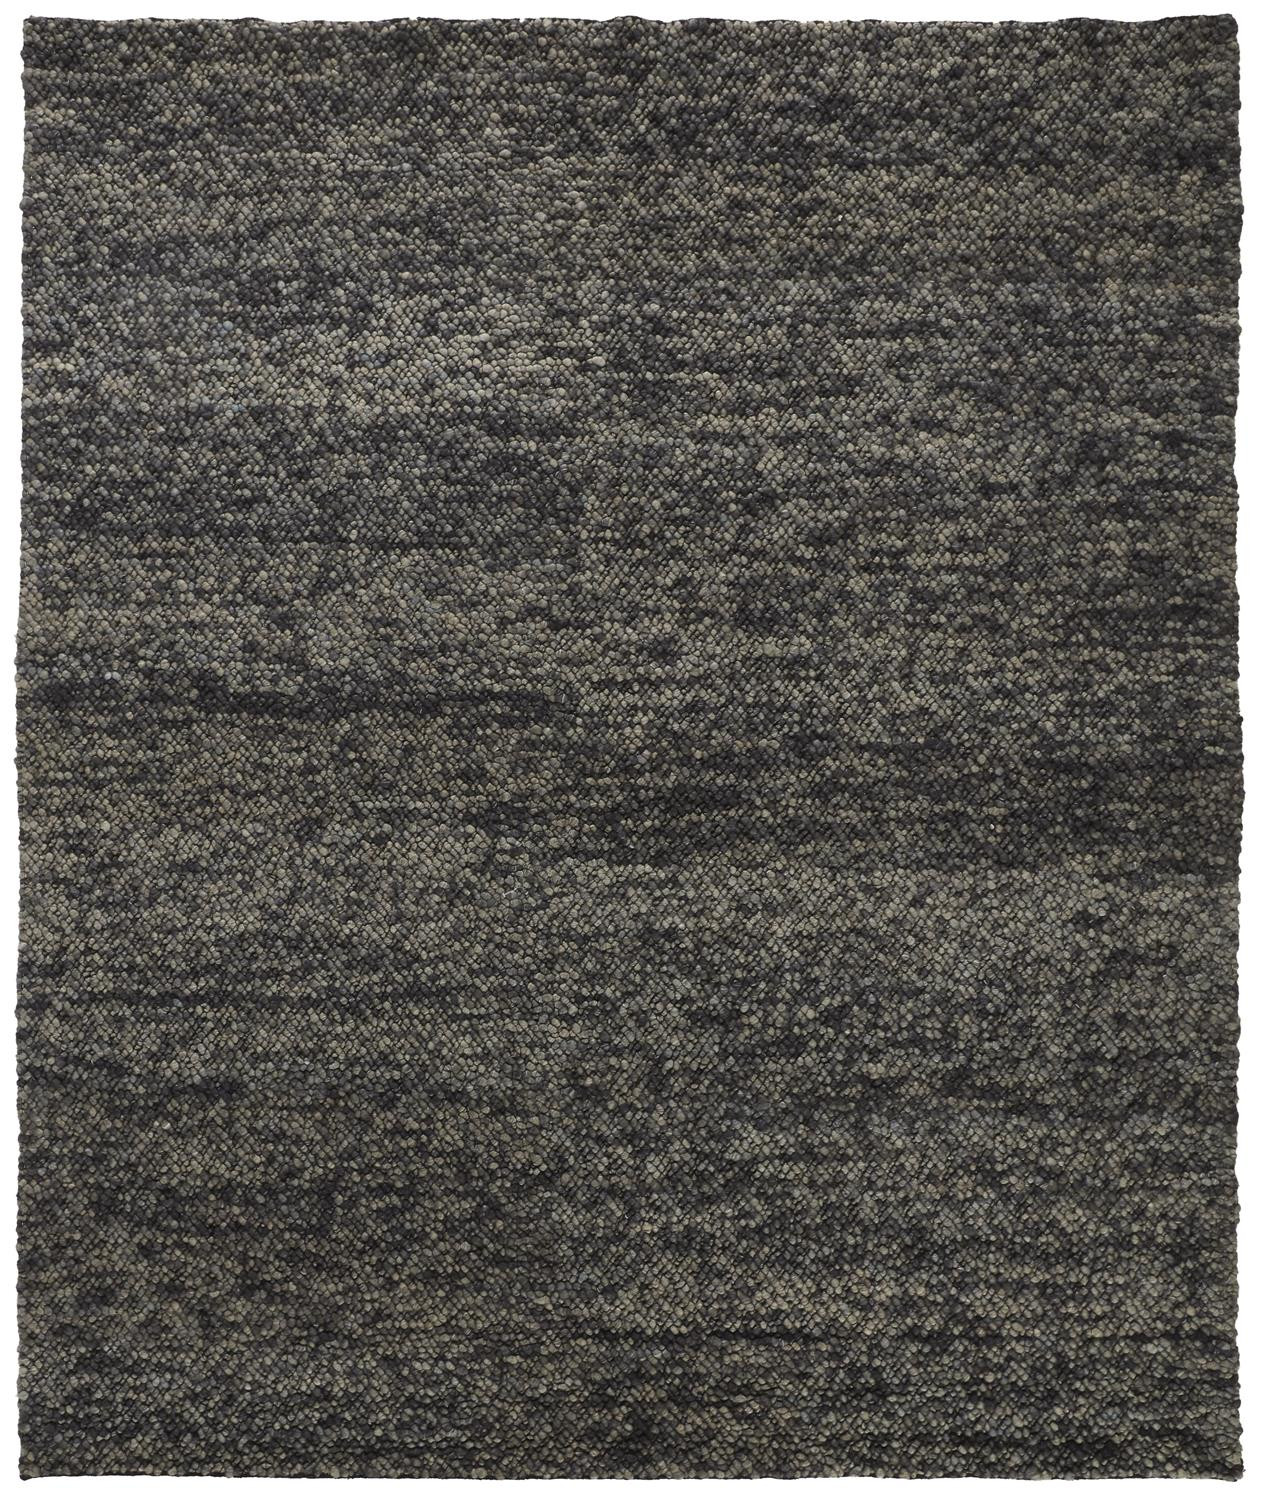 2' X 3' Gray Taupe And Black Wool Hand Woven Distressed Stain Resistant Area Rug-515283-1